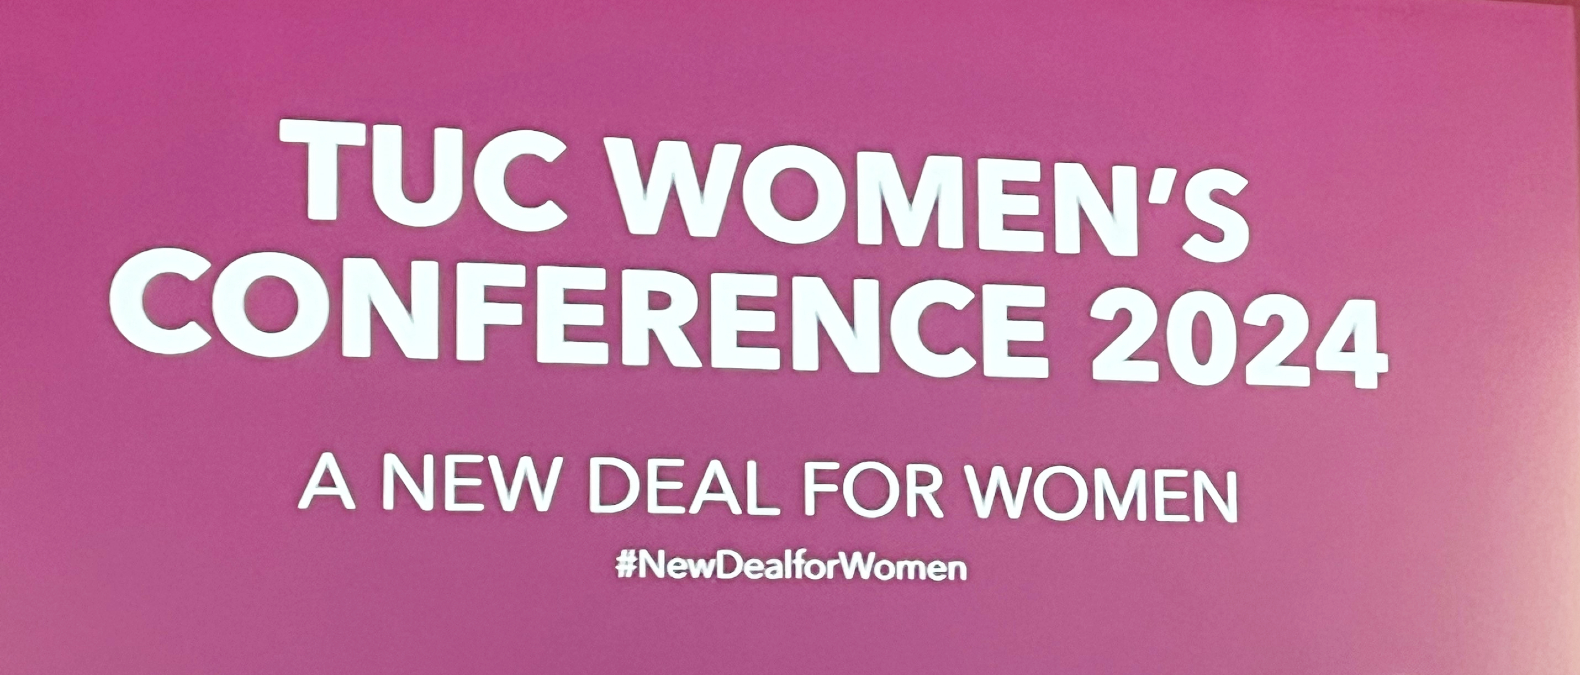 TUC Women's Conference 2024